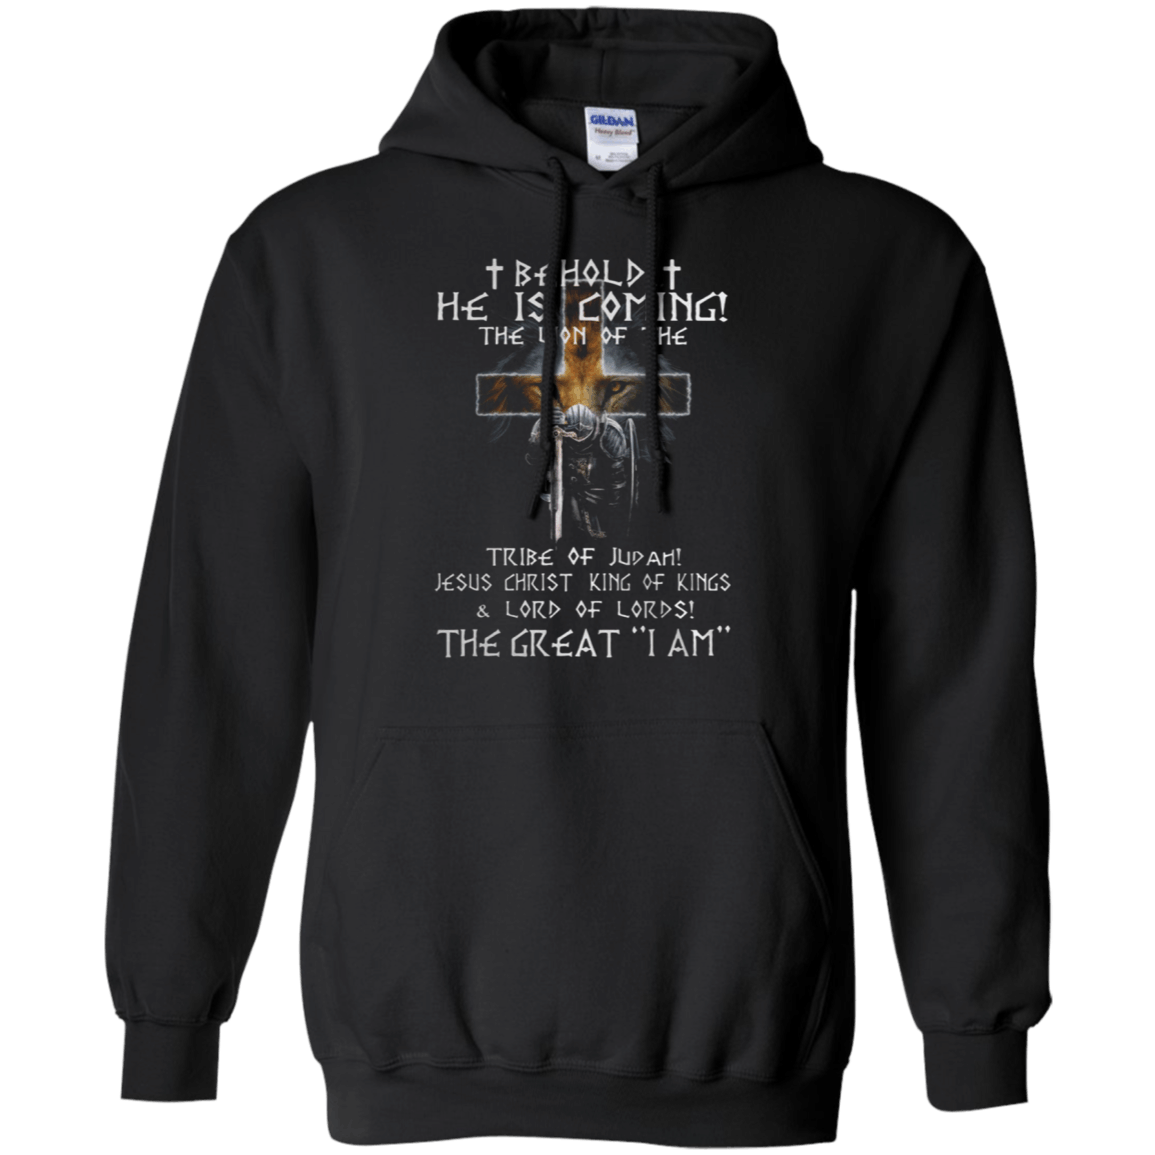 Behold he is coming the lion of the tribe of Judah Jesus Christ king of kings shirt Hoodie